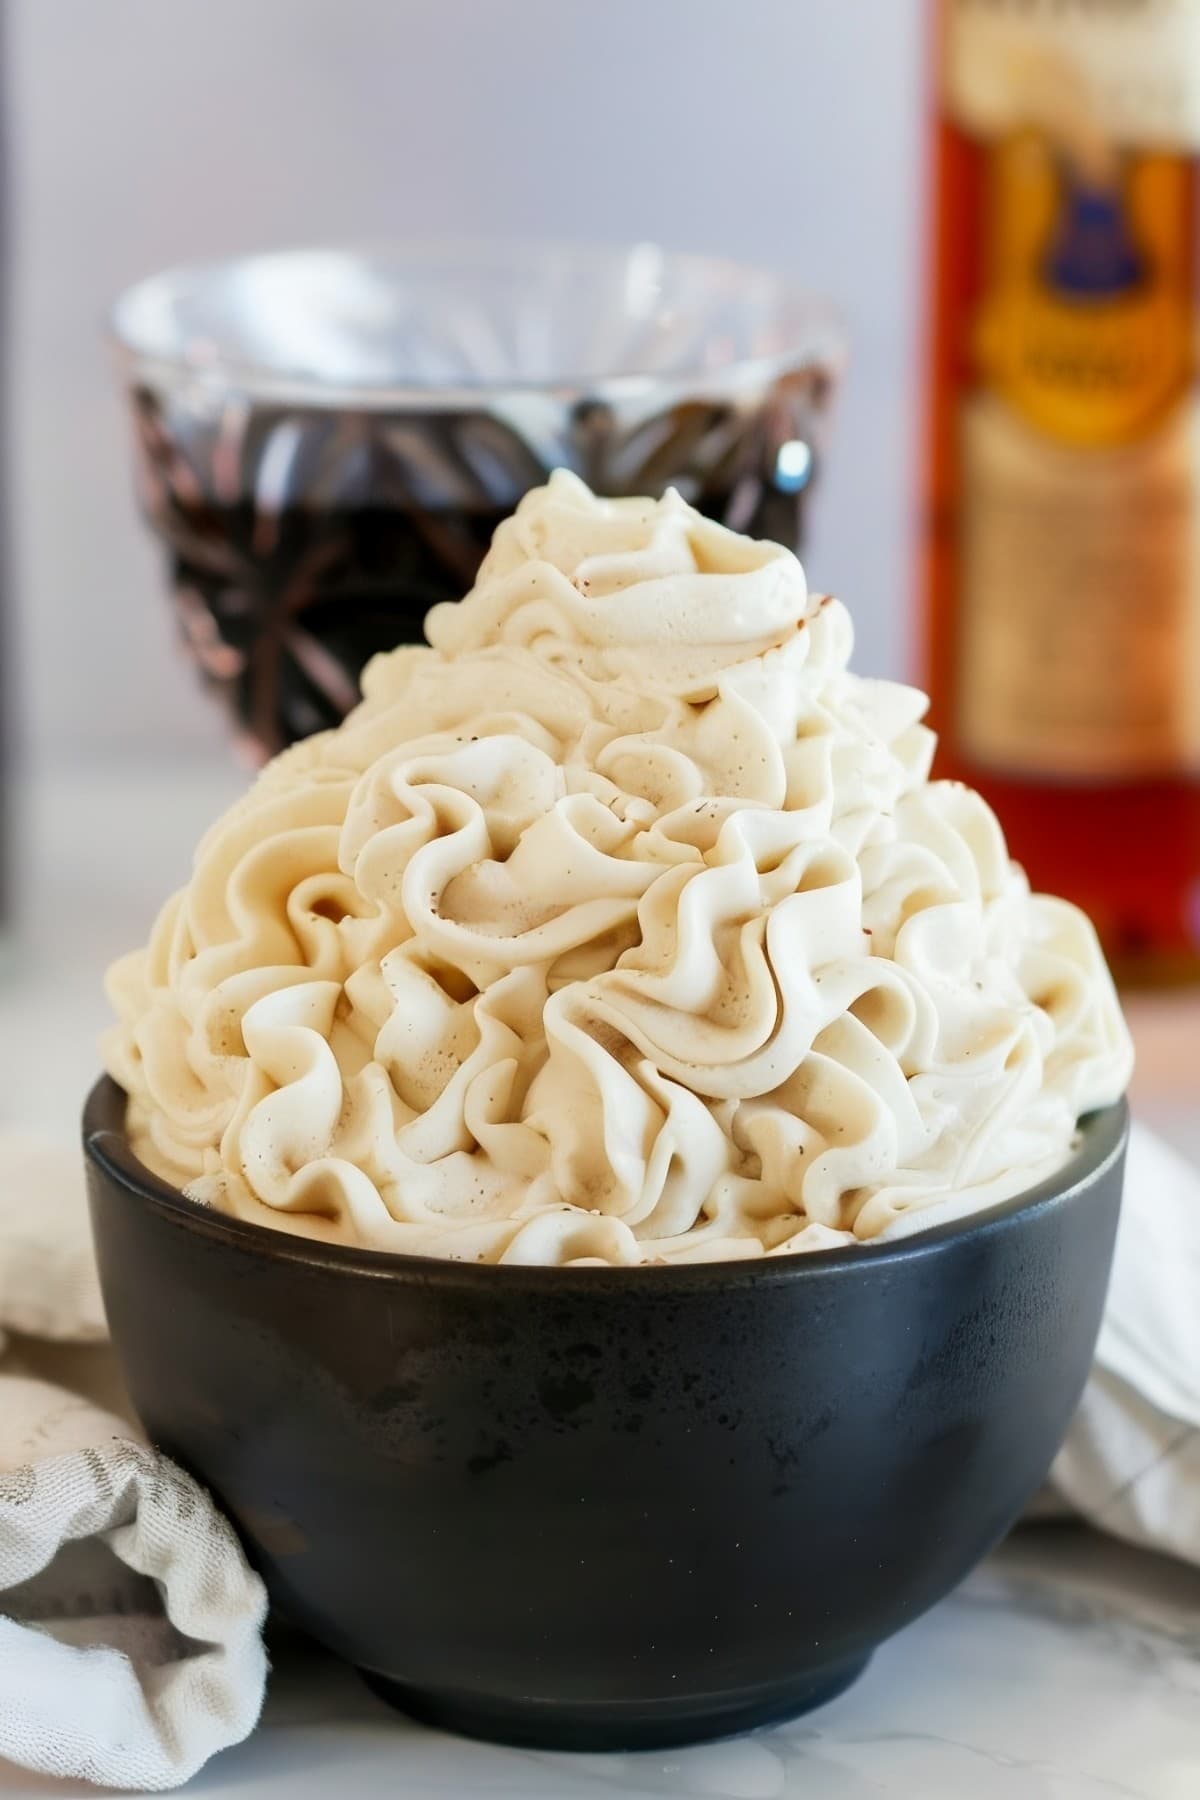 Silky Kahlua-infused whipped cream, adding a hint of coffee liqueur to your favorite desserts